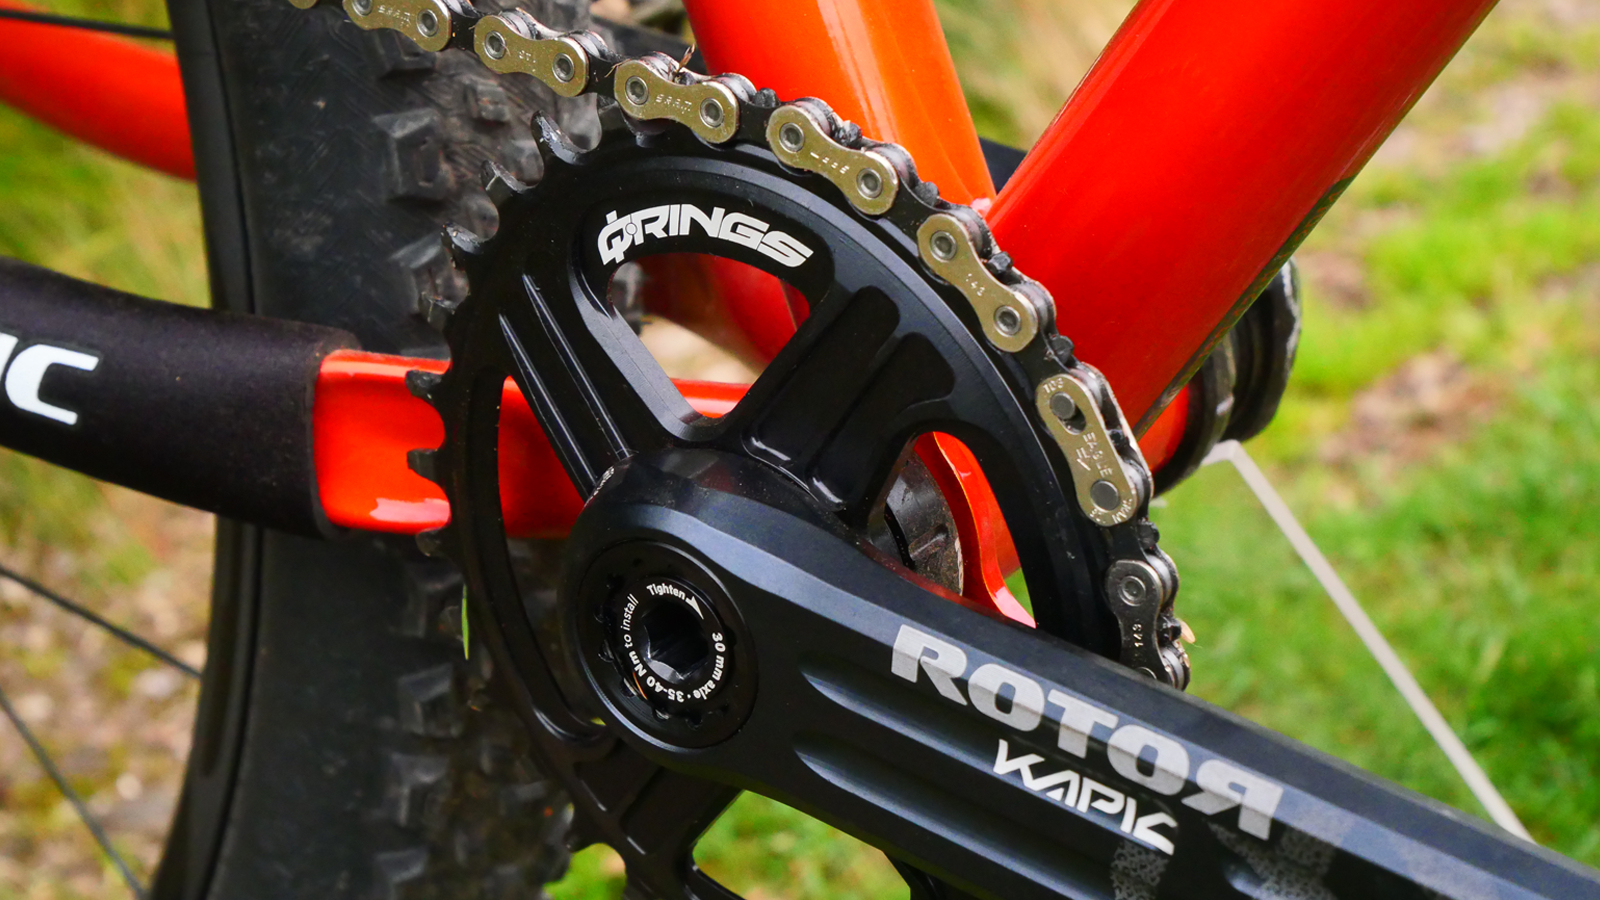 Rotor Kapic crankset fitted with a oval Q Ring